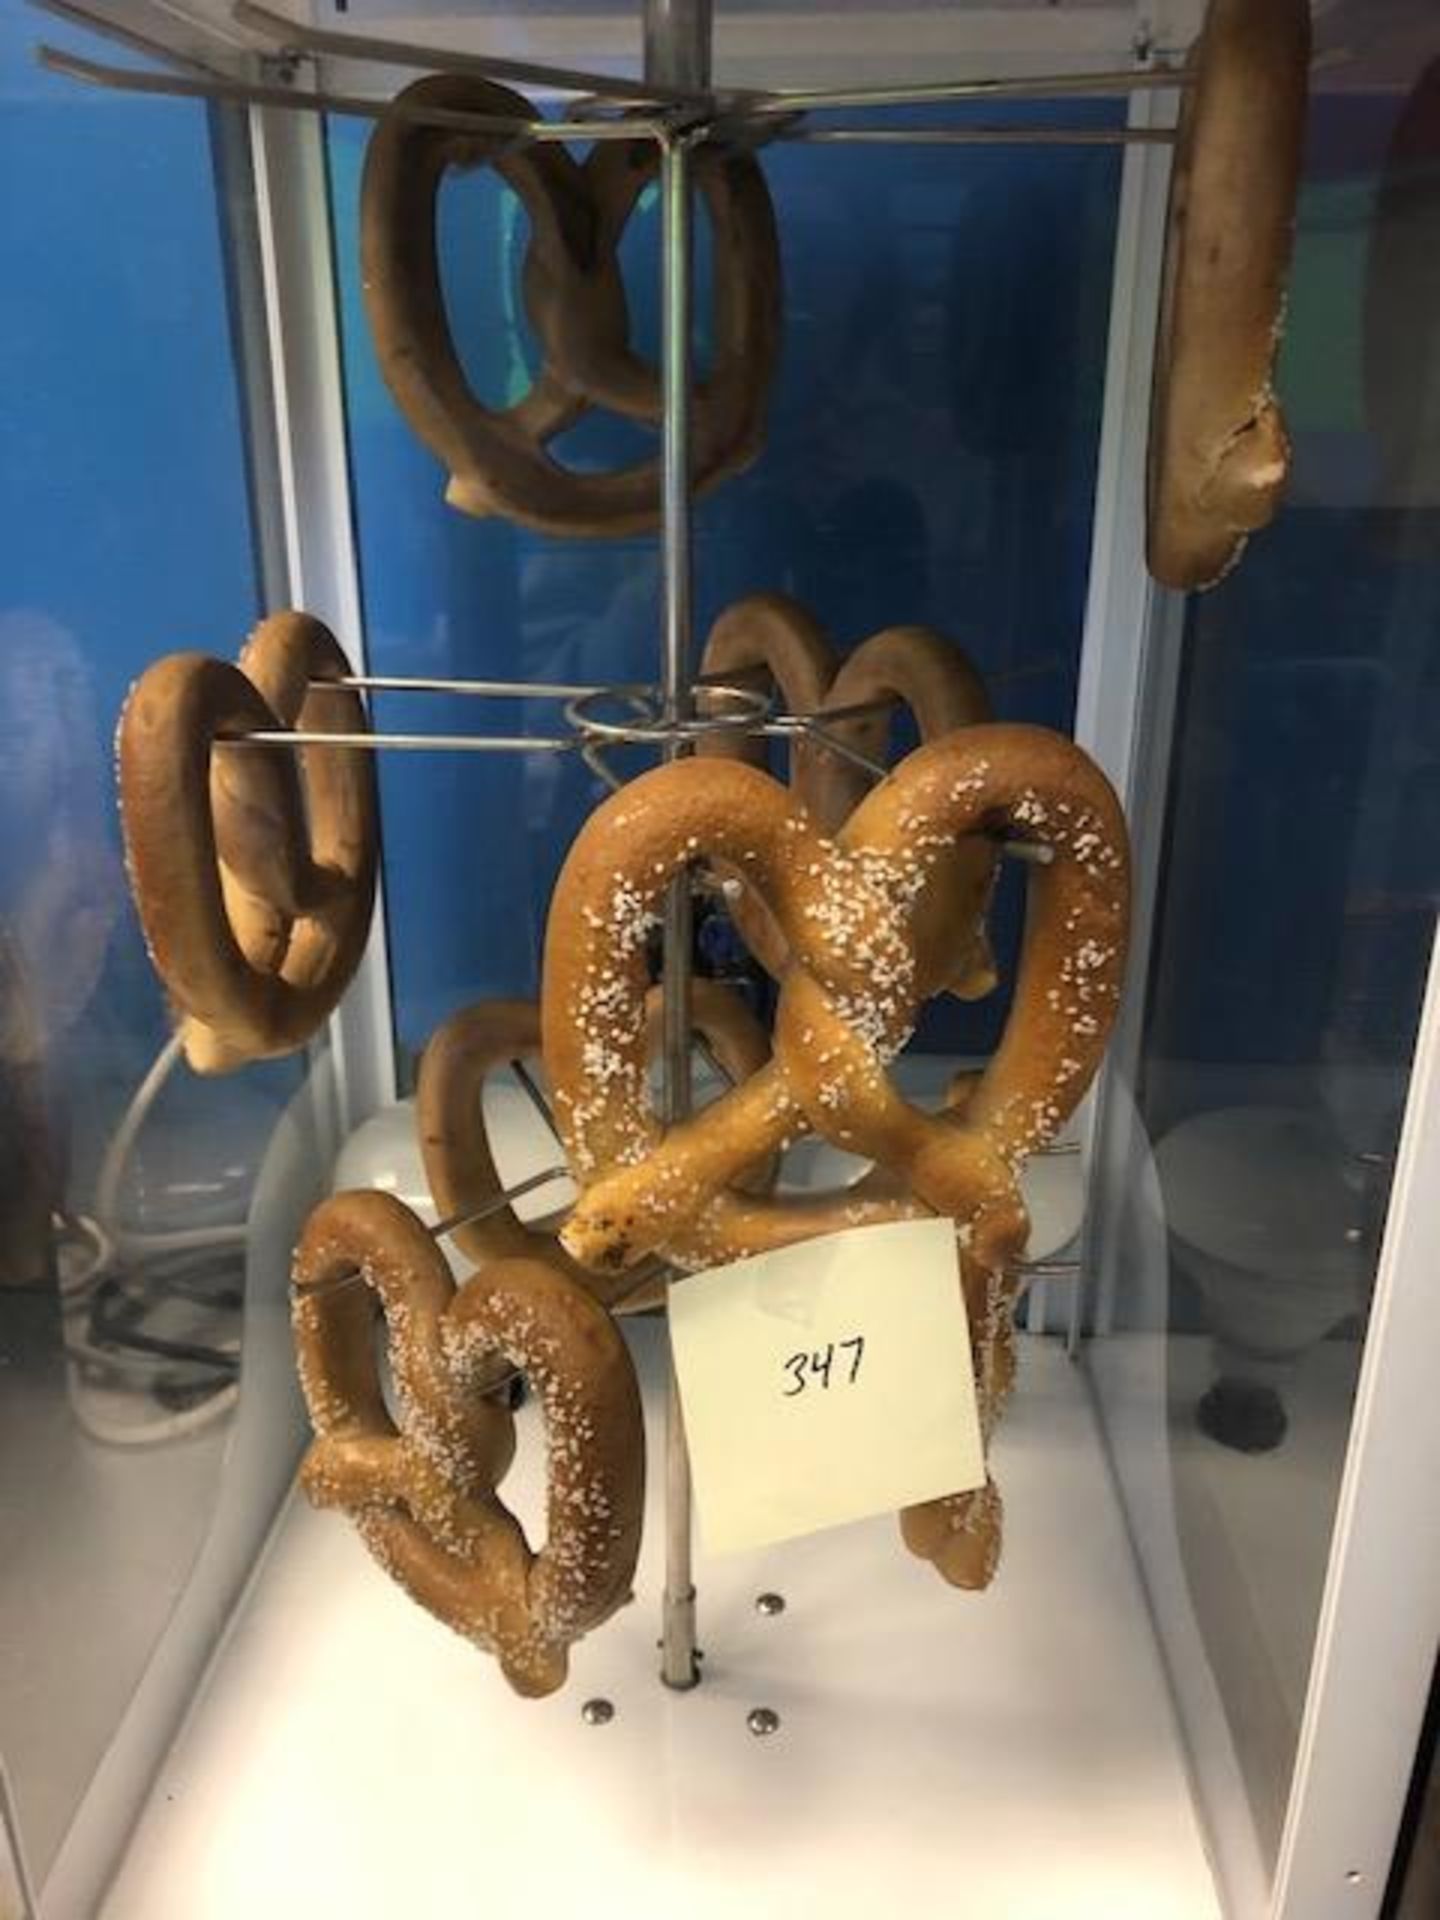 Fake large pretzels for a display unit (does not include unit)